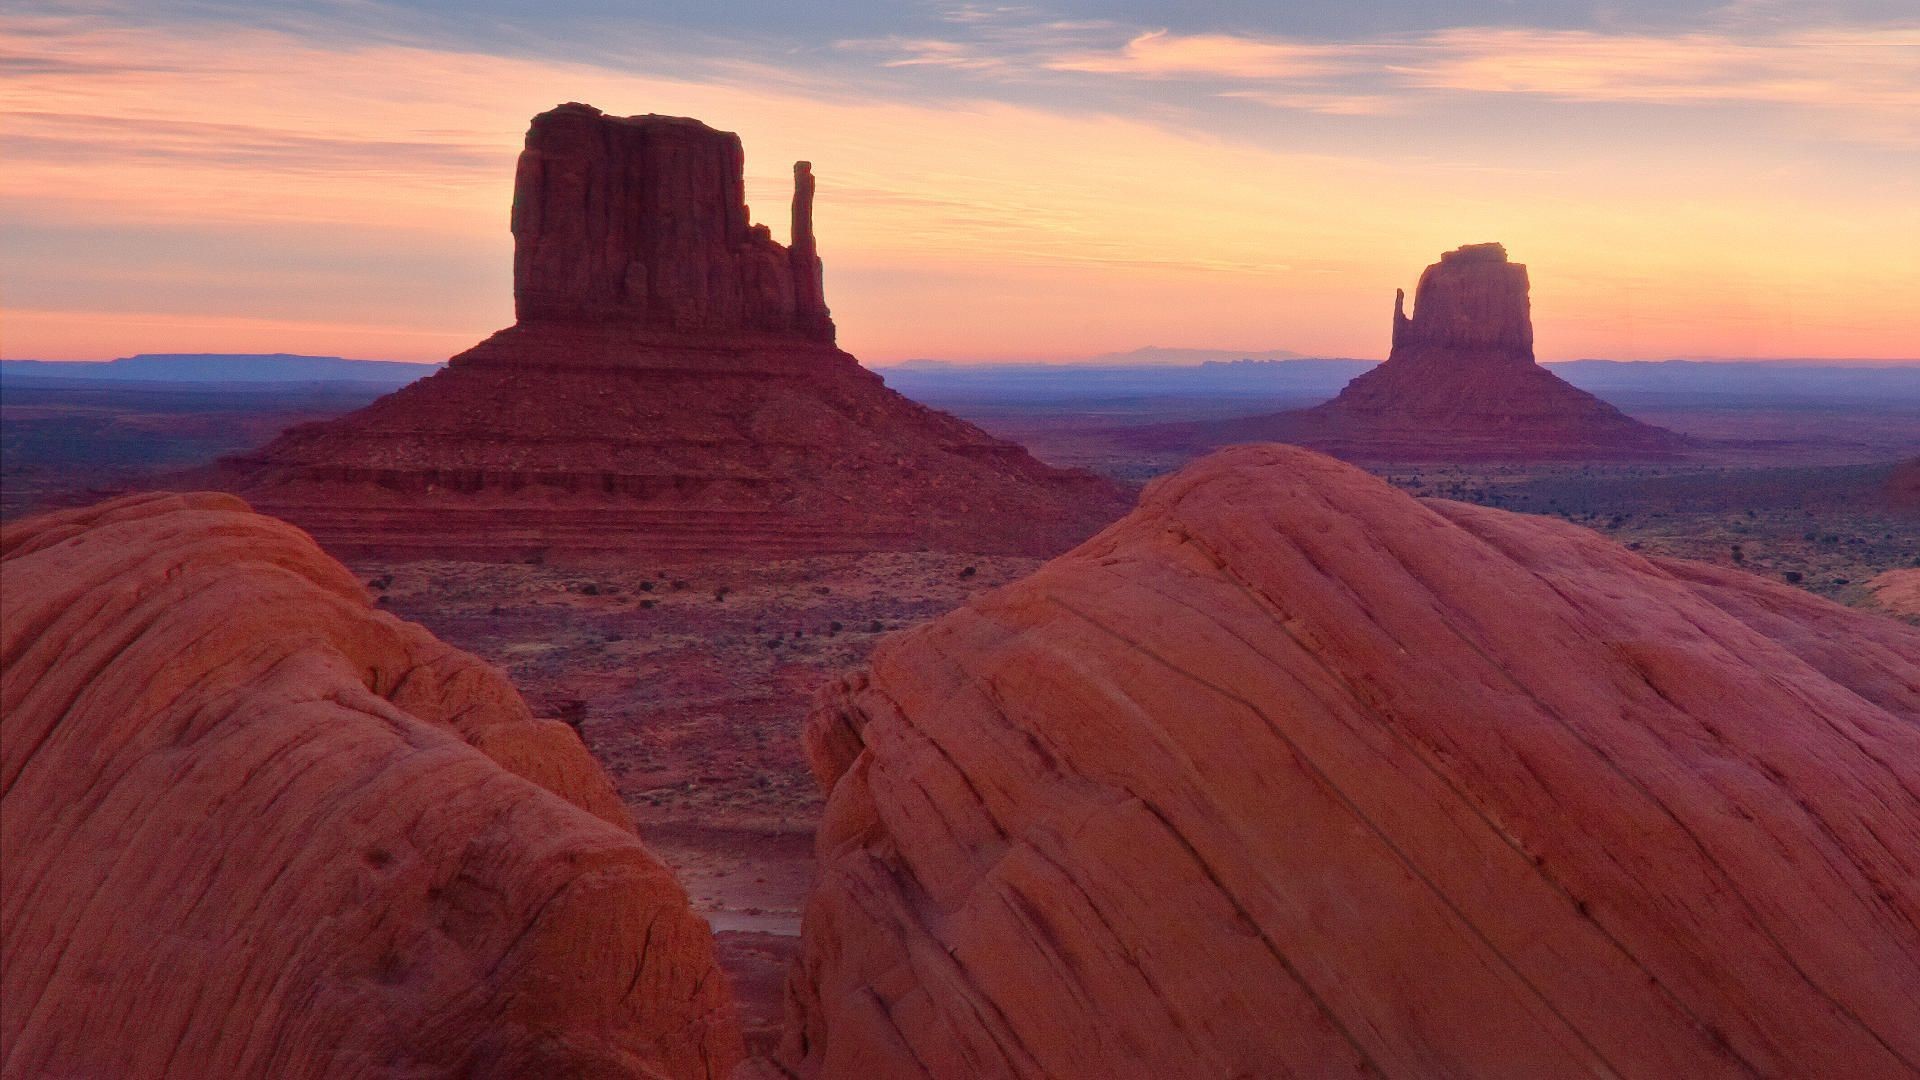 1920x1080 Other pictures of Monument Valley, Arizona: